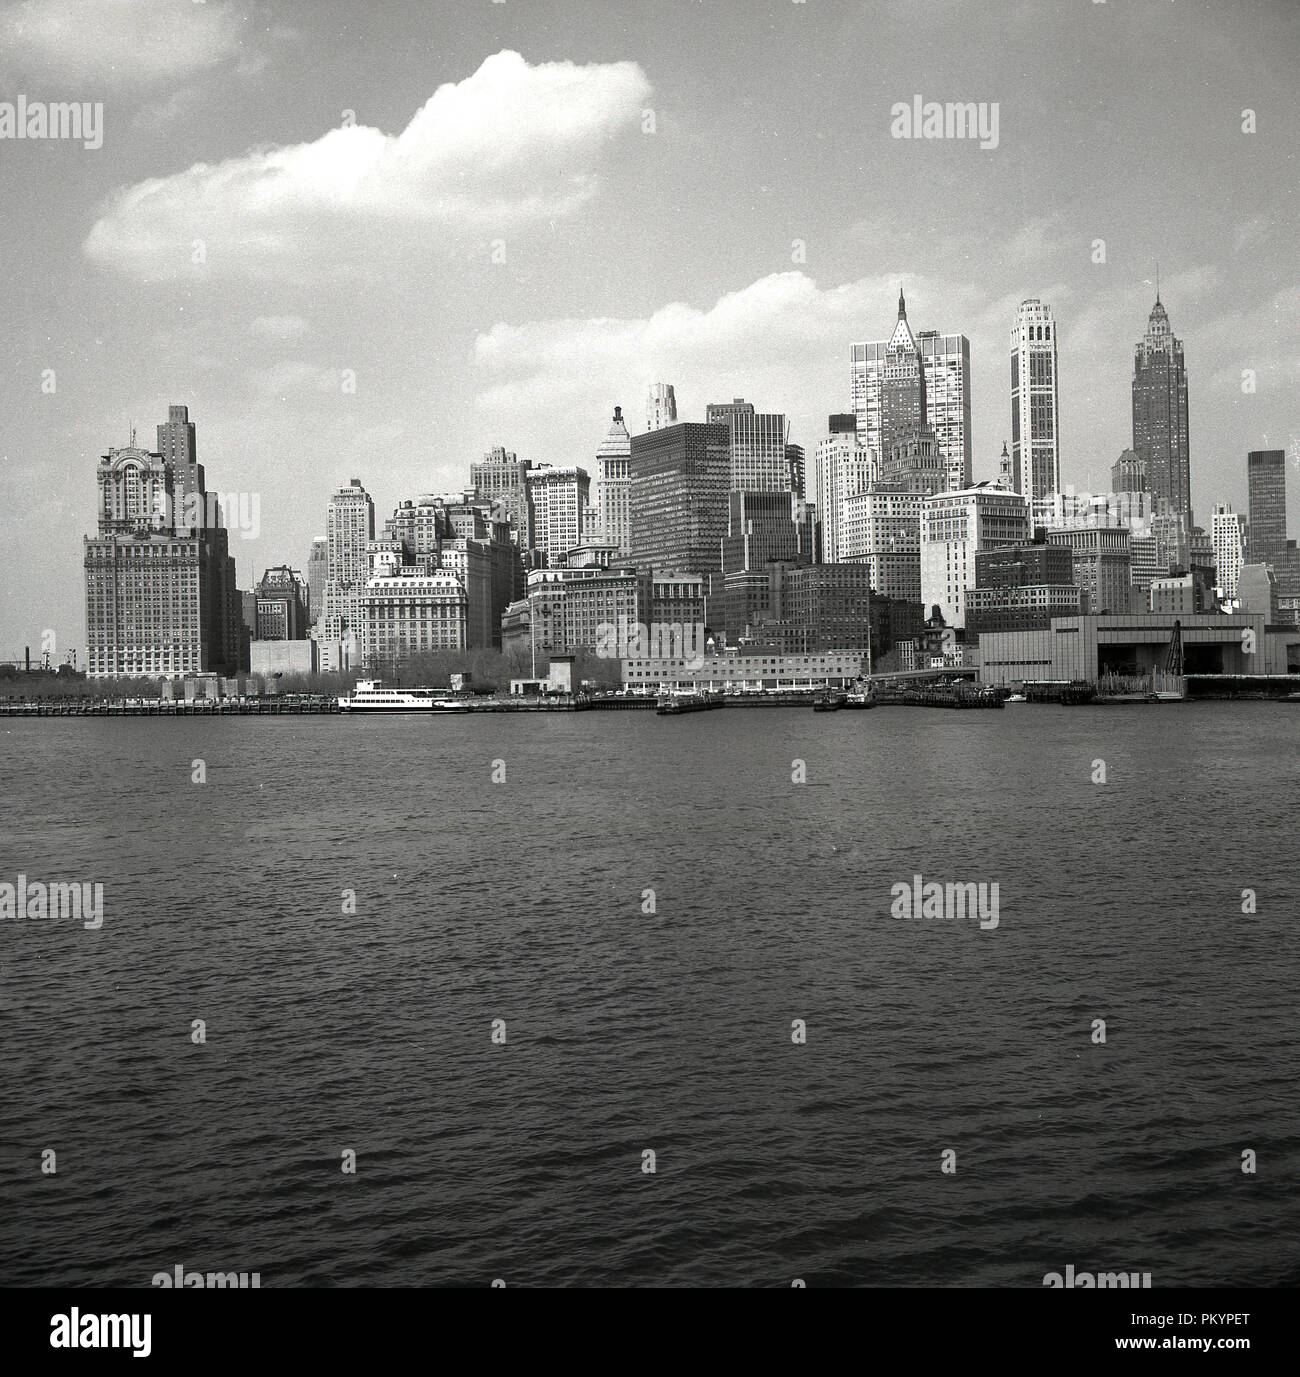 Collection 103+ Images is new york surrounded by water Stunning